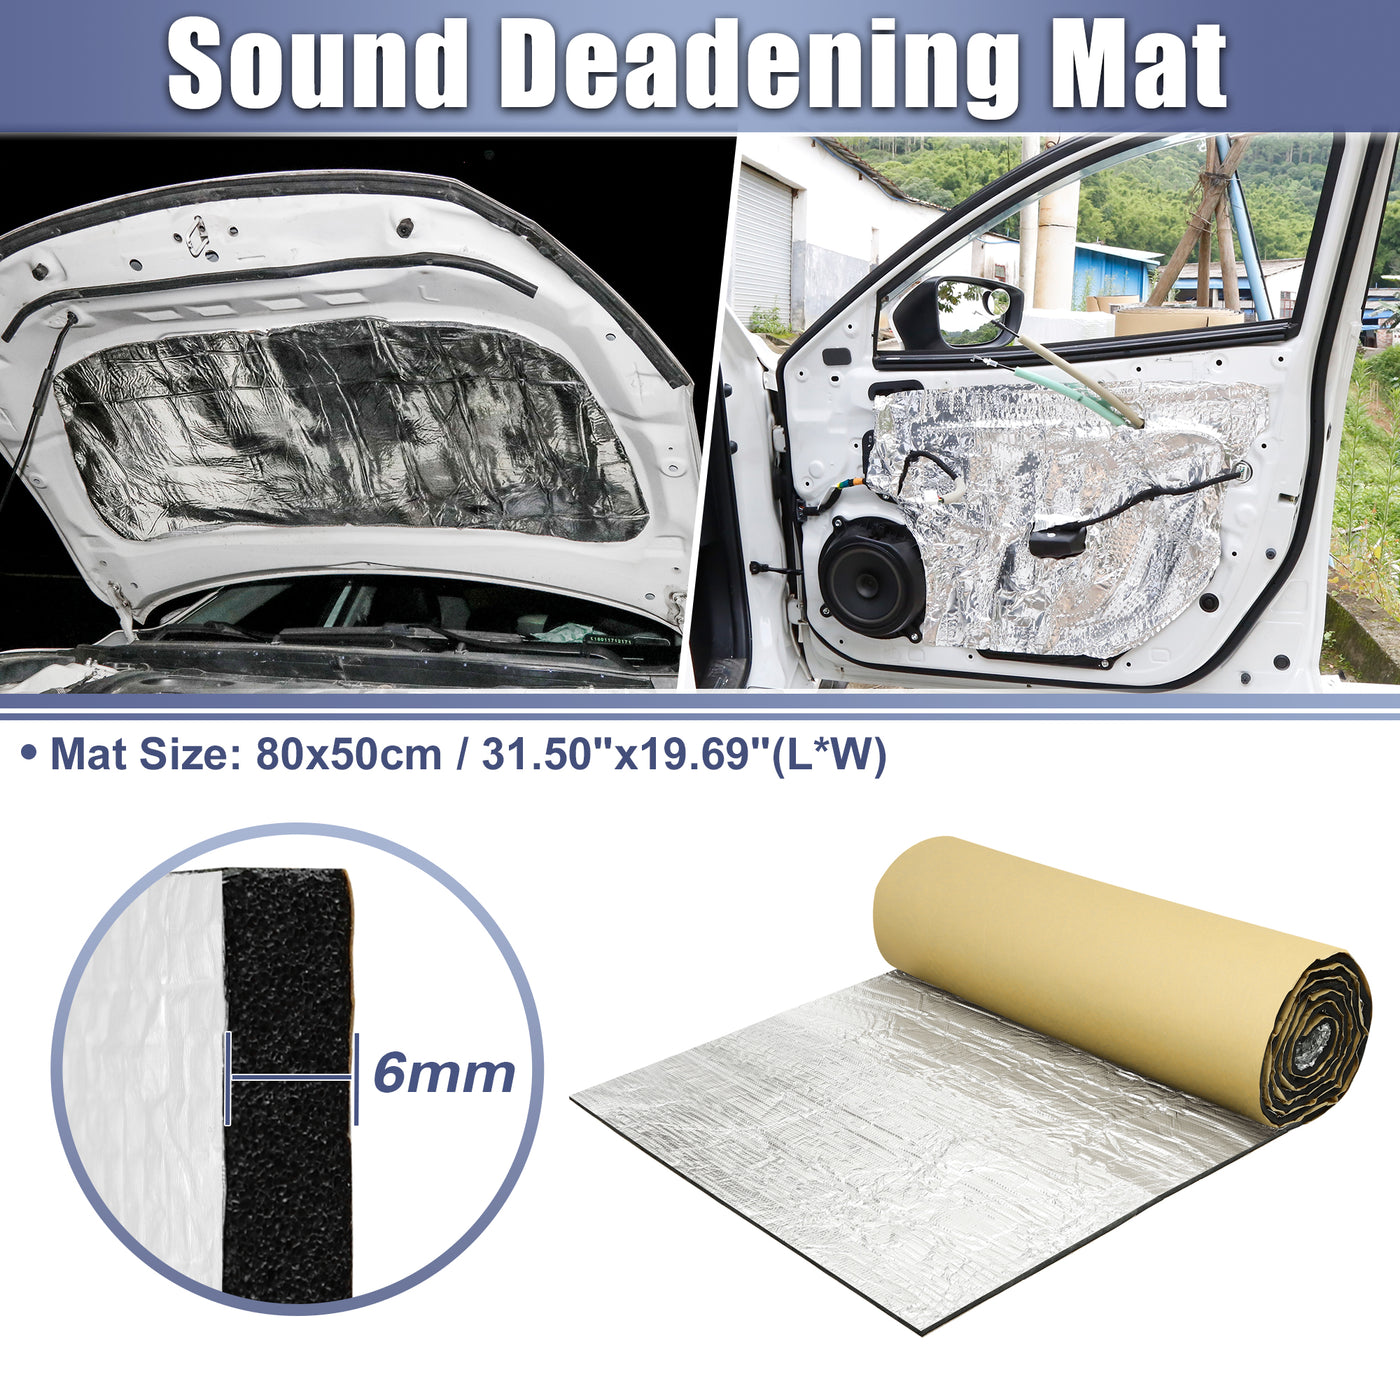 X AUTOHAUX 236mil 6mm 4.31sqft Car Sound Deadening Mat Aluminum Closed Cell Foam Heat Shield Material Damping Self Adhesive Universal for Hood Fender and Boat Engine Cover 31.50"x19.69"